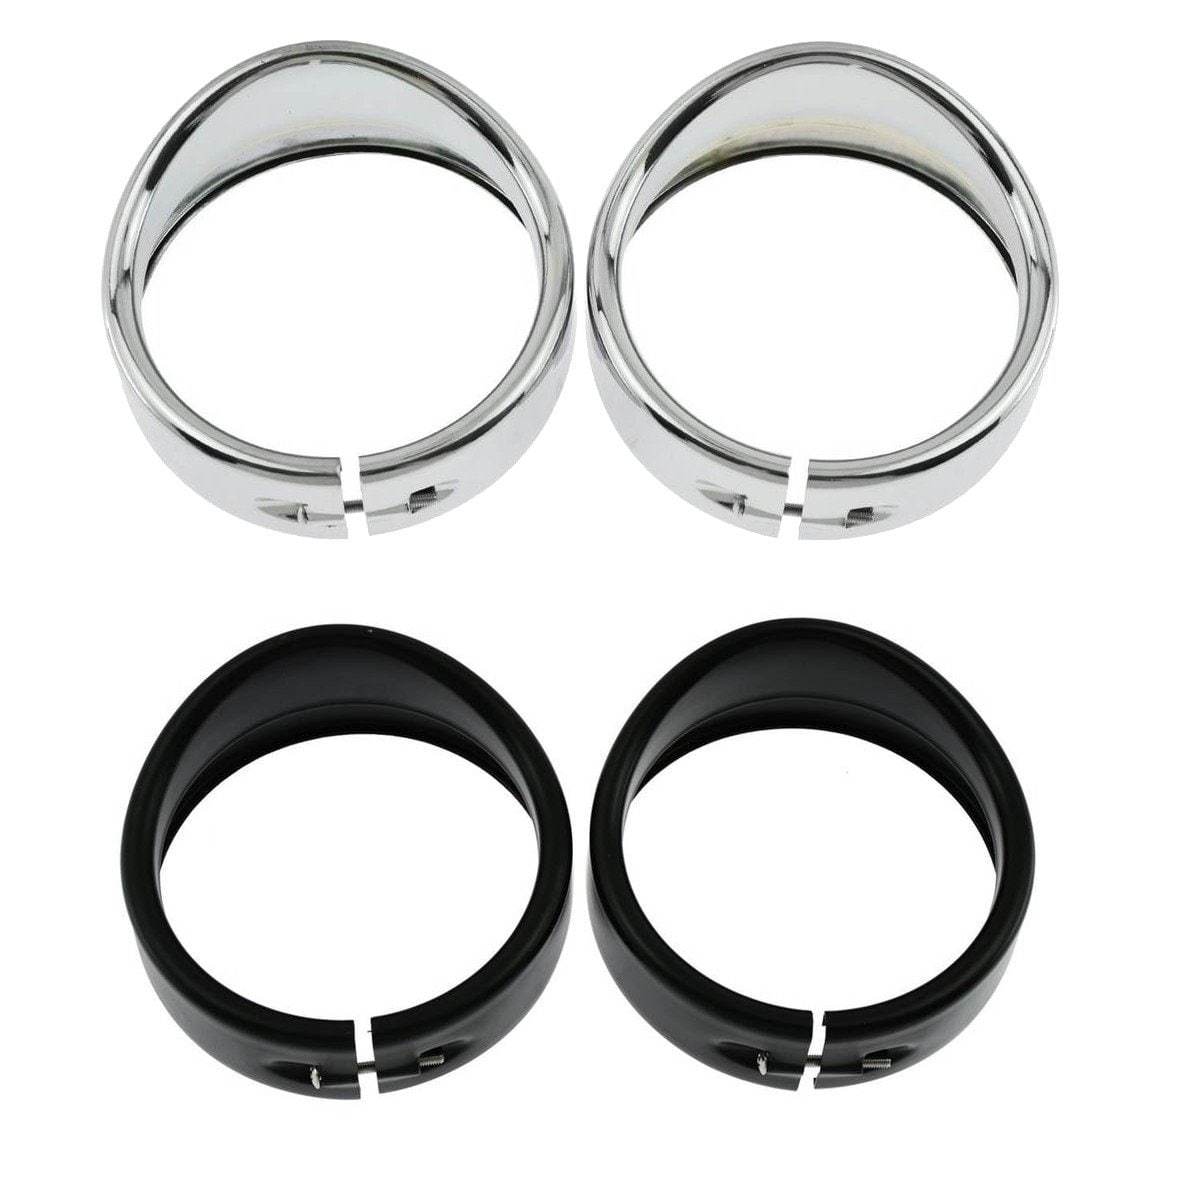 Eagle Lights Motorcycle 4.5" 4 1/2 LED Auxiliary Light Visor Style Passing Lamp Trim Ring For Harley